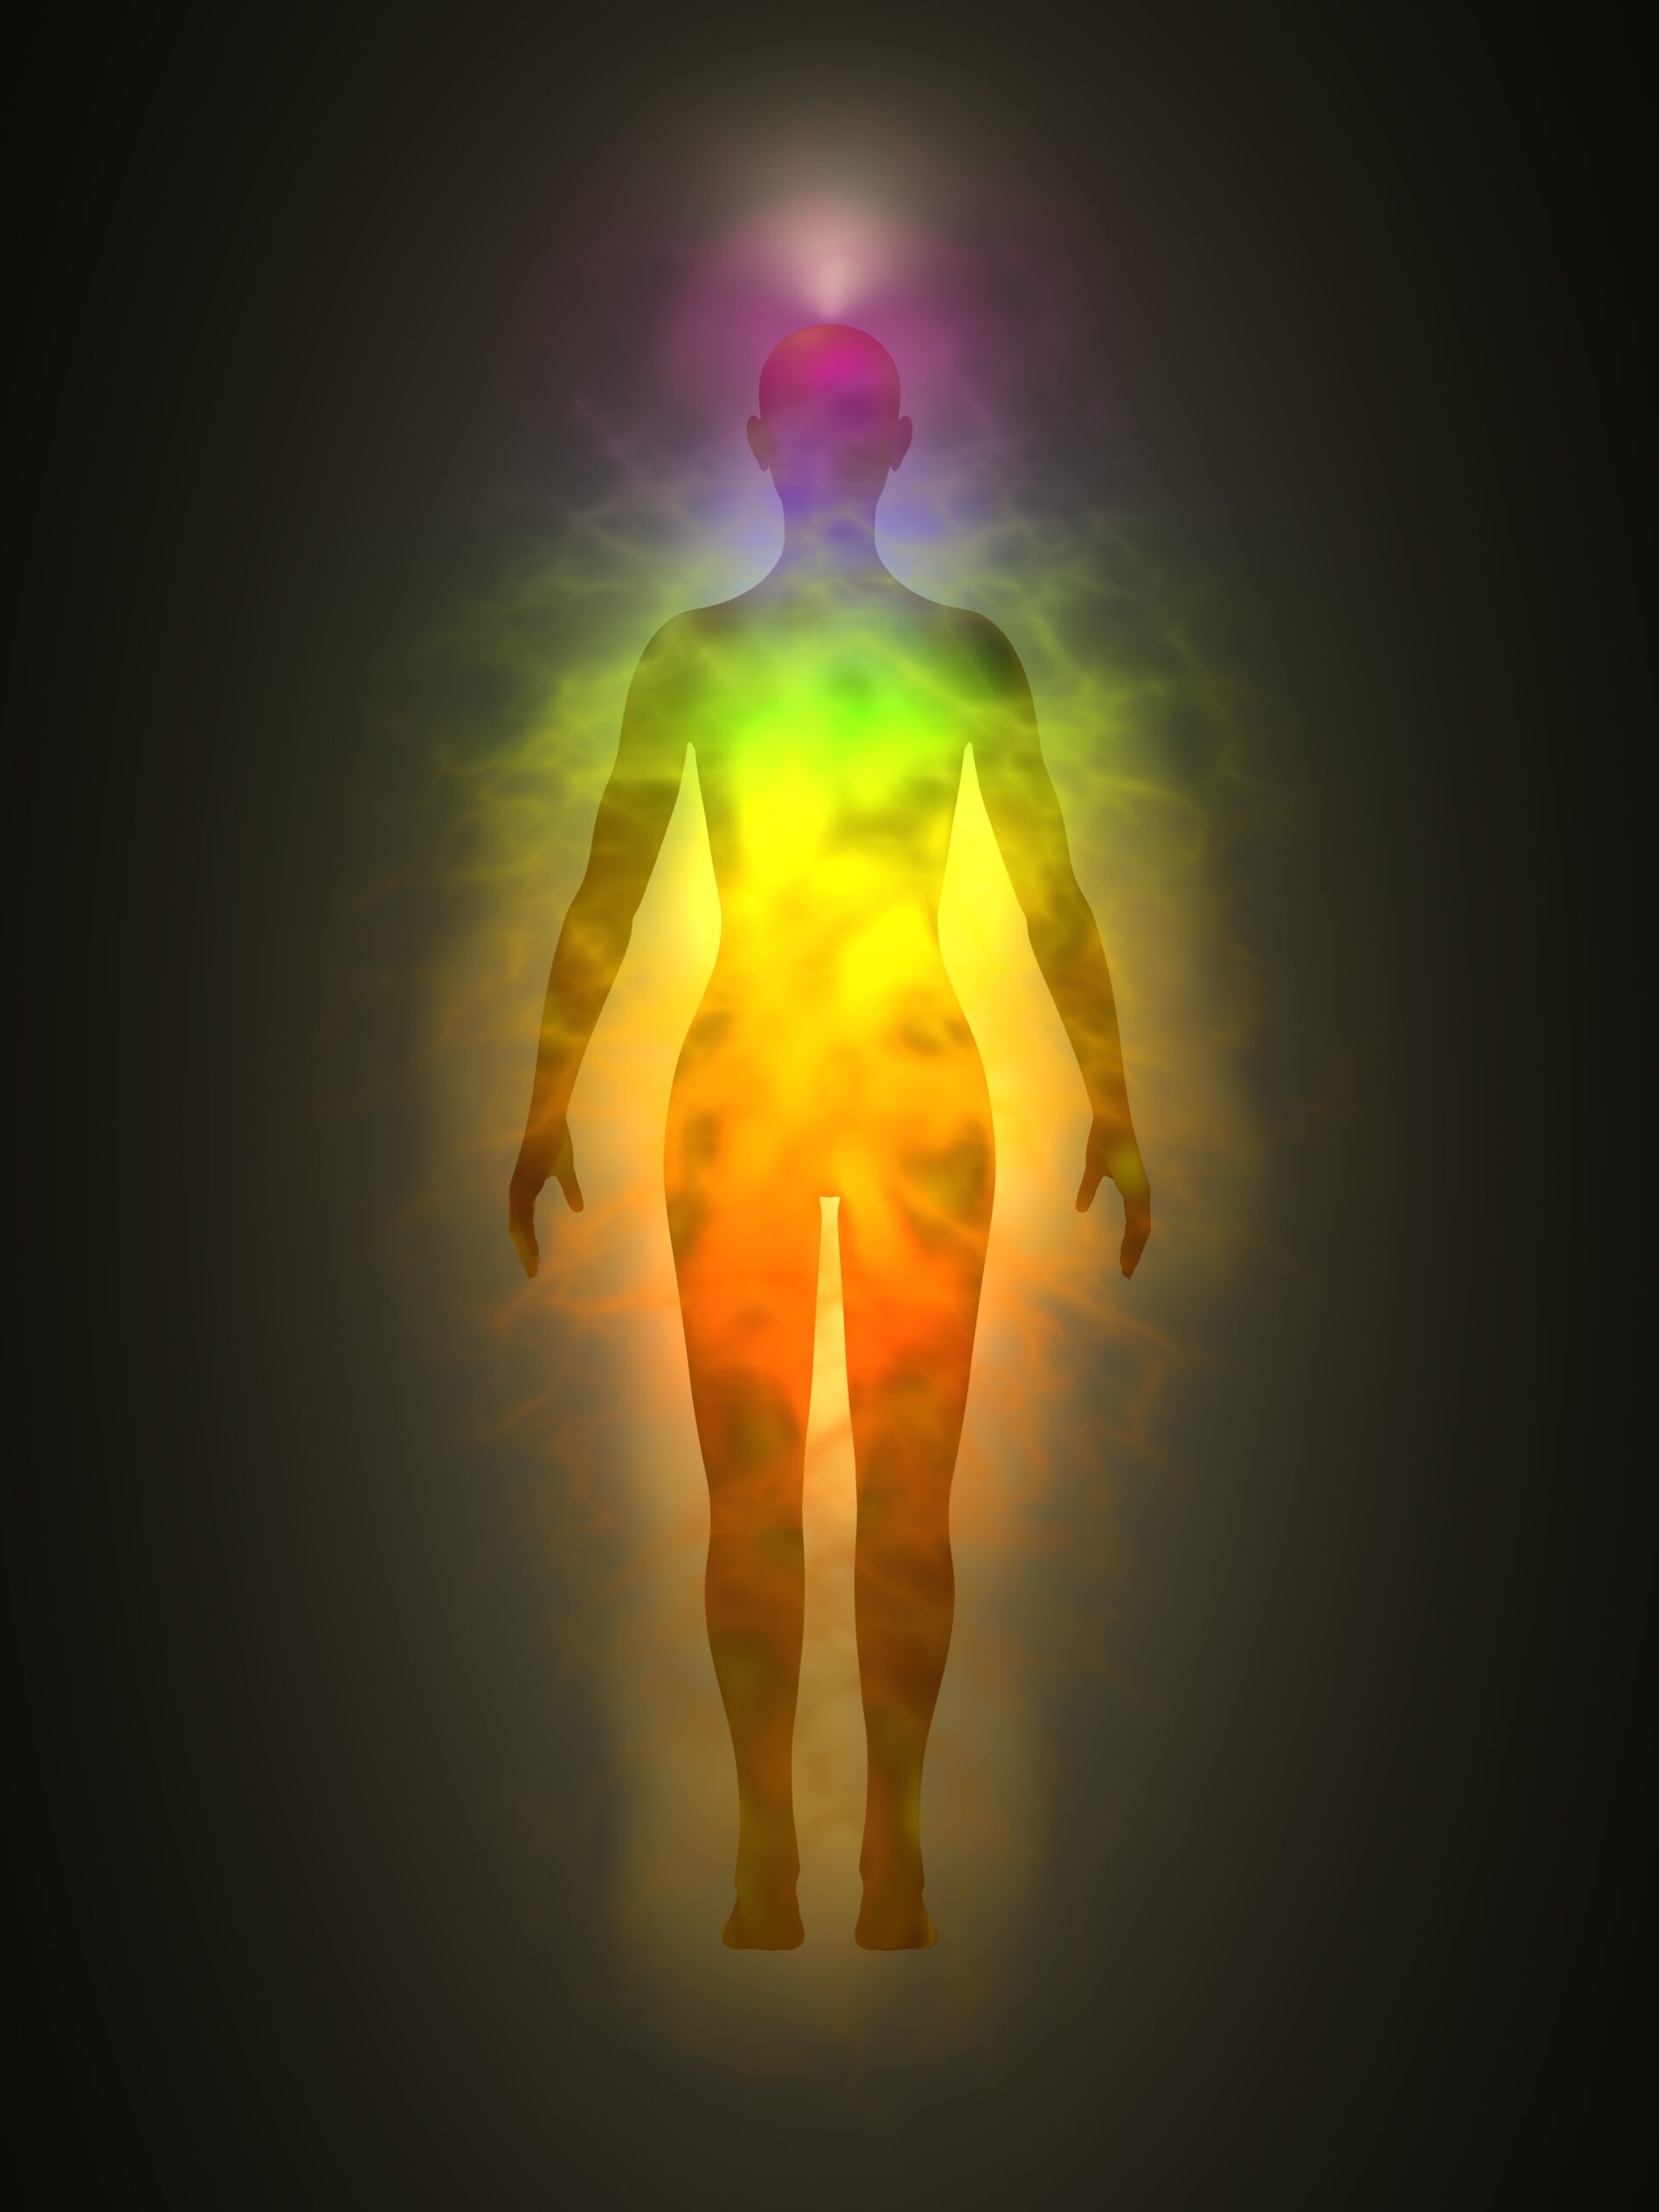 The 3 human bodies and the 3 planes of consciousness